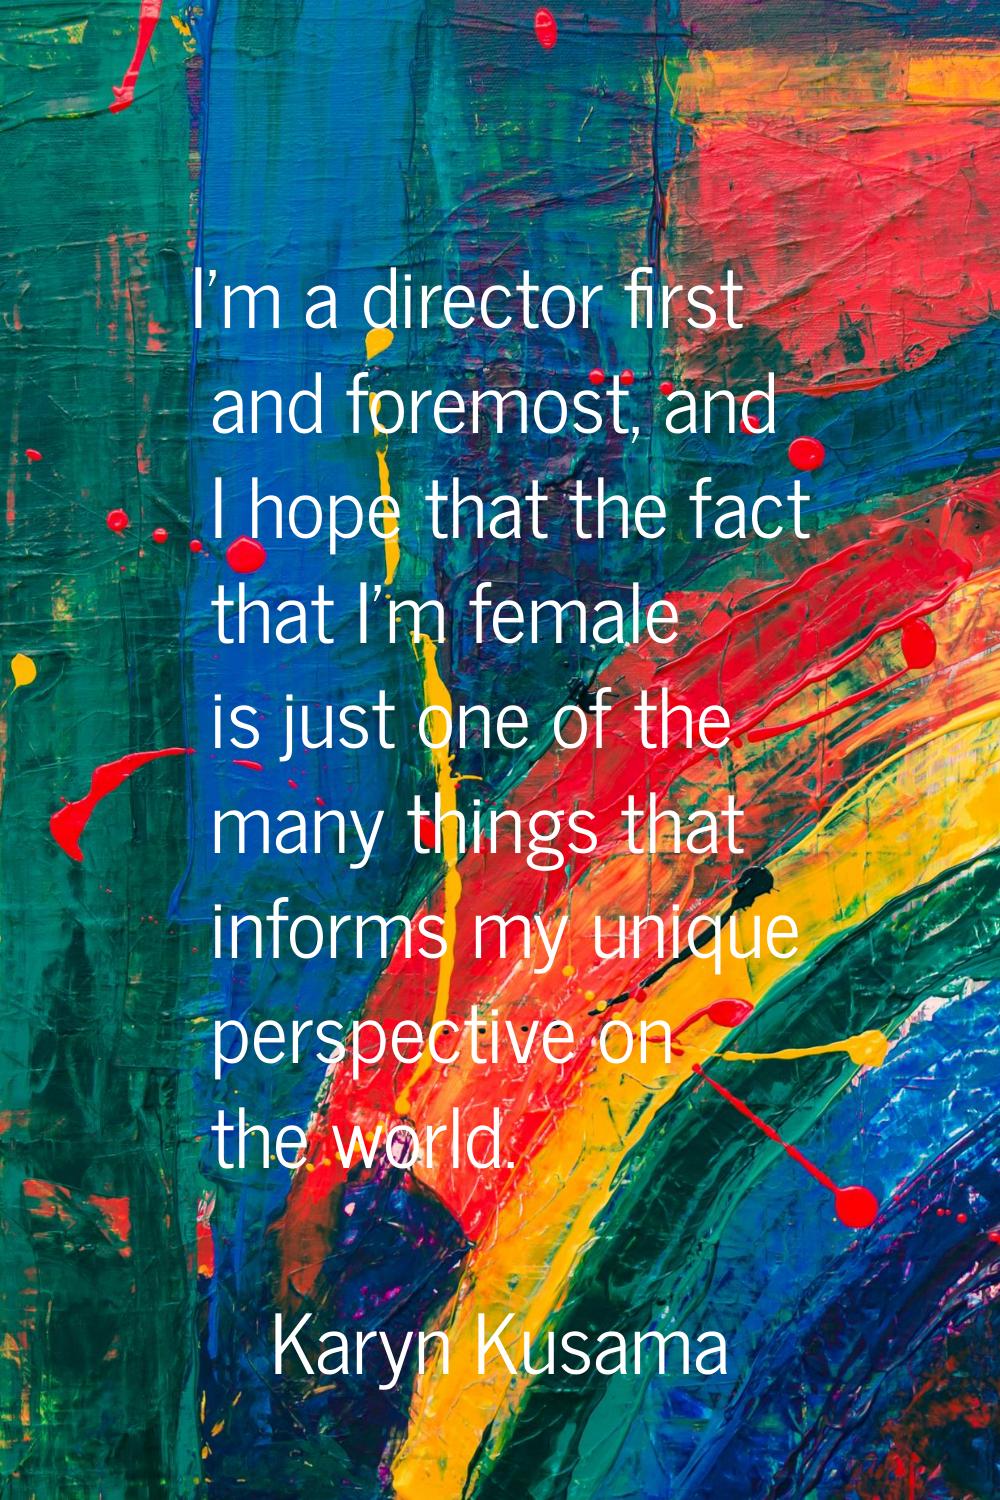 I'm a director first and foremost, and I hope that the fact that I'm female is just one of the many